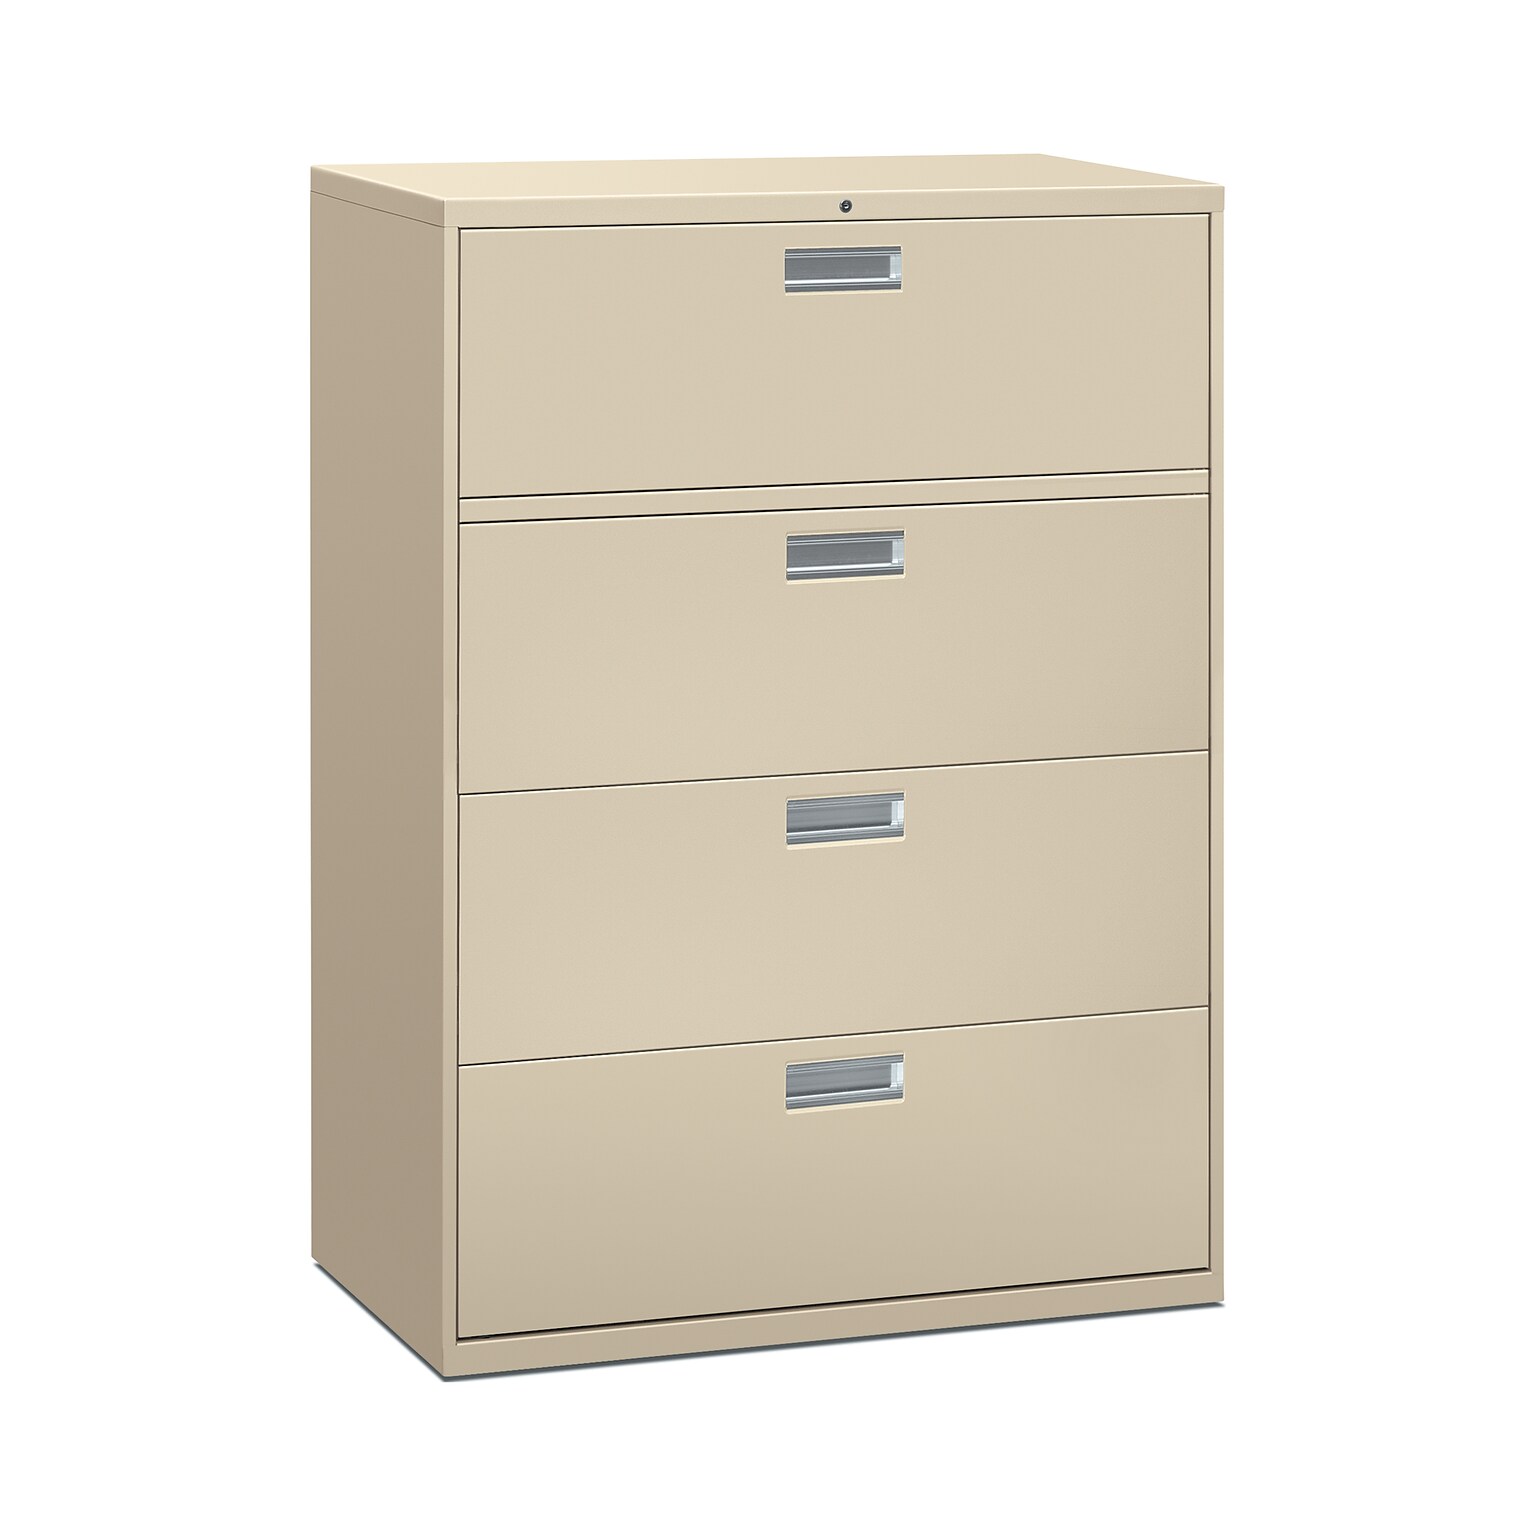 HON Brigade 600 Series 4-Drawer Lateral File Cabinet, Locking, Letter/Legal, Putty/Beige, 42W (HON694LL)